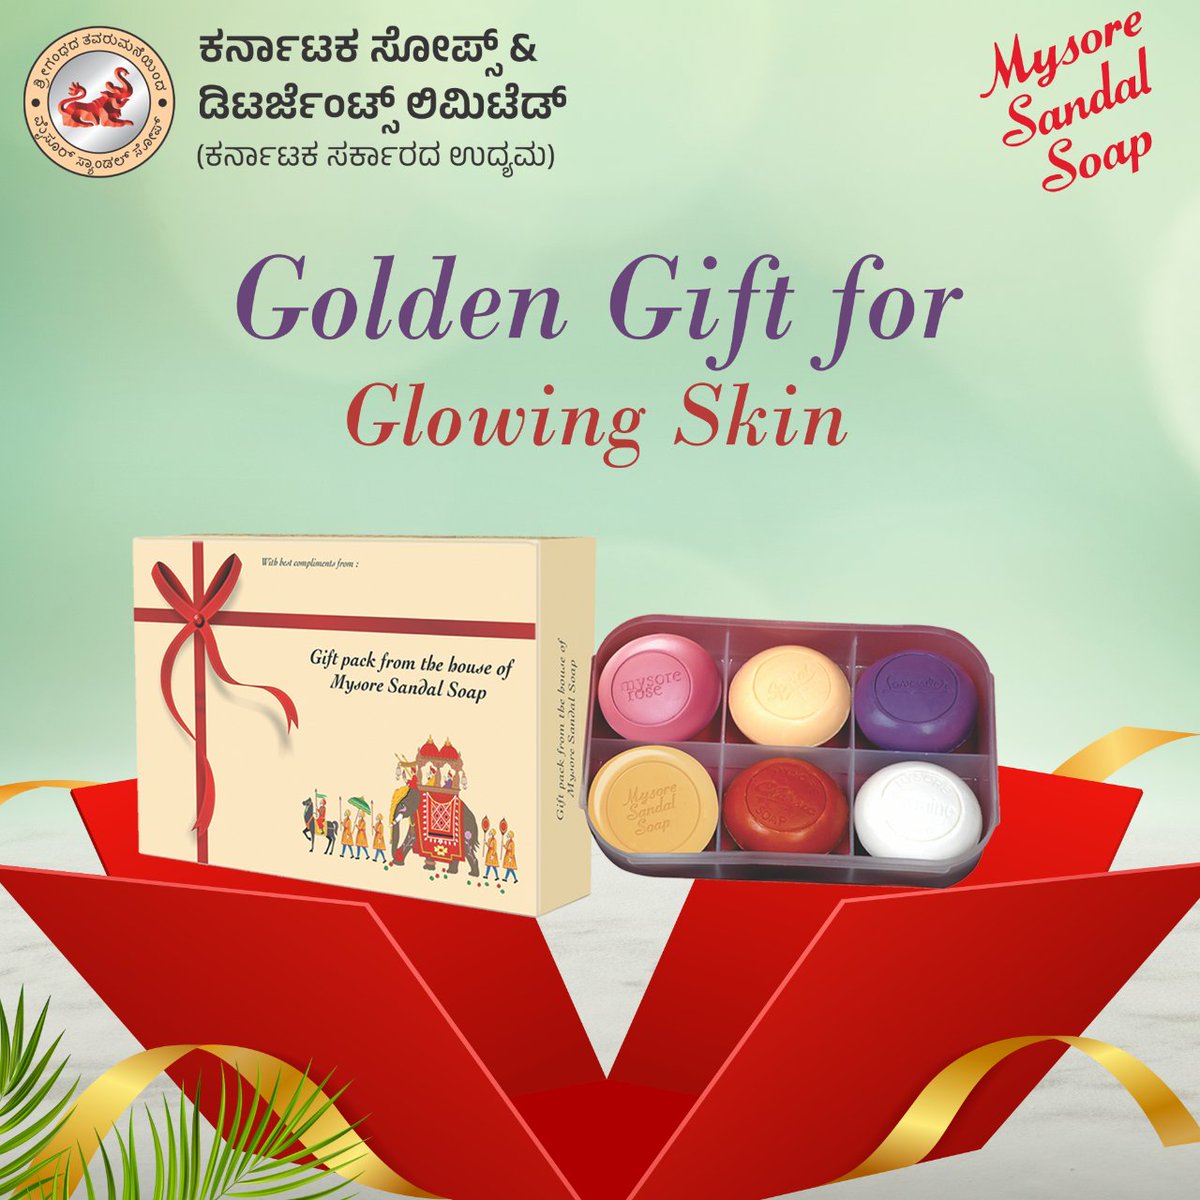 ✨ Elevate your skincare with our Golden Gift Pack! 🌟 Pure sandalwood luxury for radiant, golden skin. 🍃

#MysoreSandal #GoldenSkin #LuxurySkincare #Sandalwood #PureSandal #SandalwoodProducts #MysoreSandalProducts